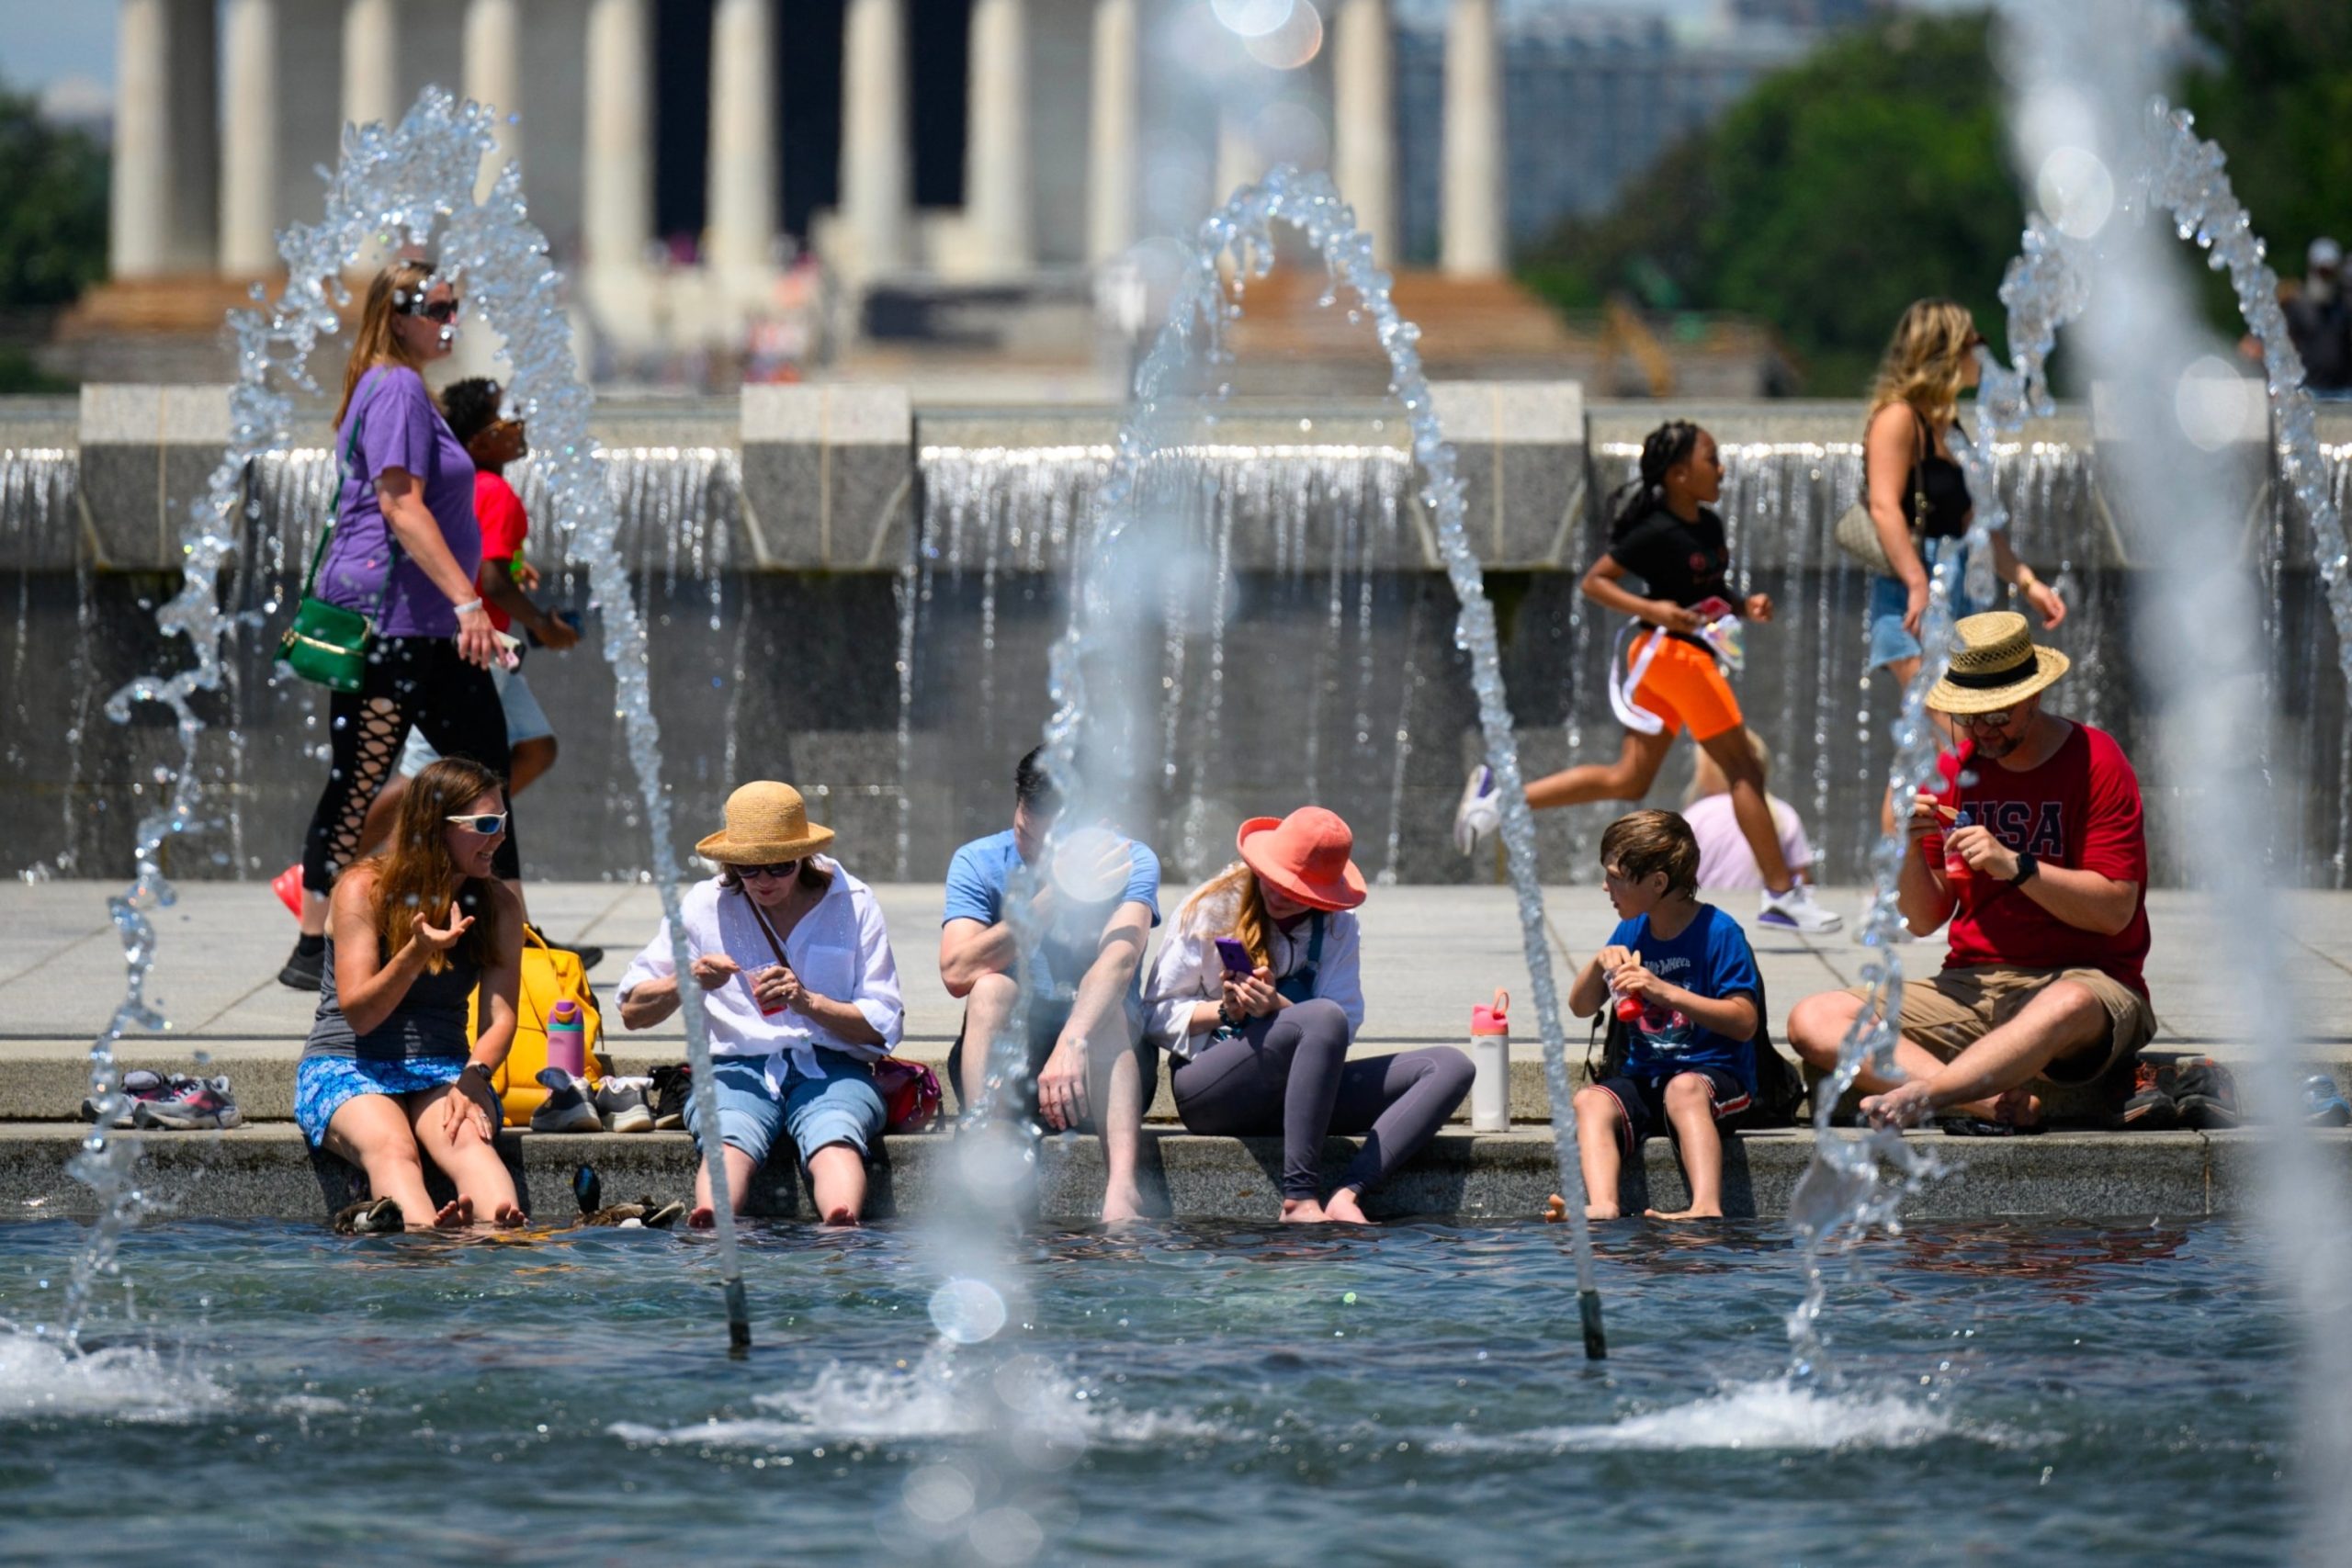 27 States and 100 Million People Prepare for Extreme Temperatures as Heat Dome Expands